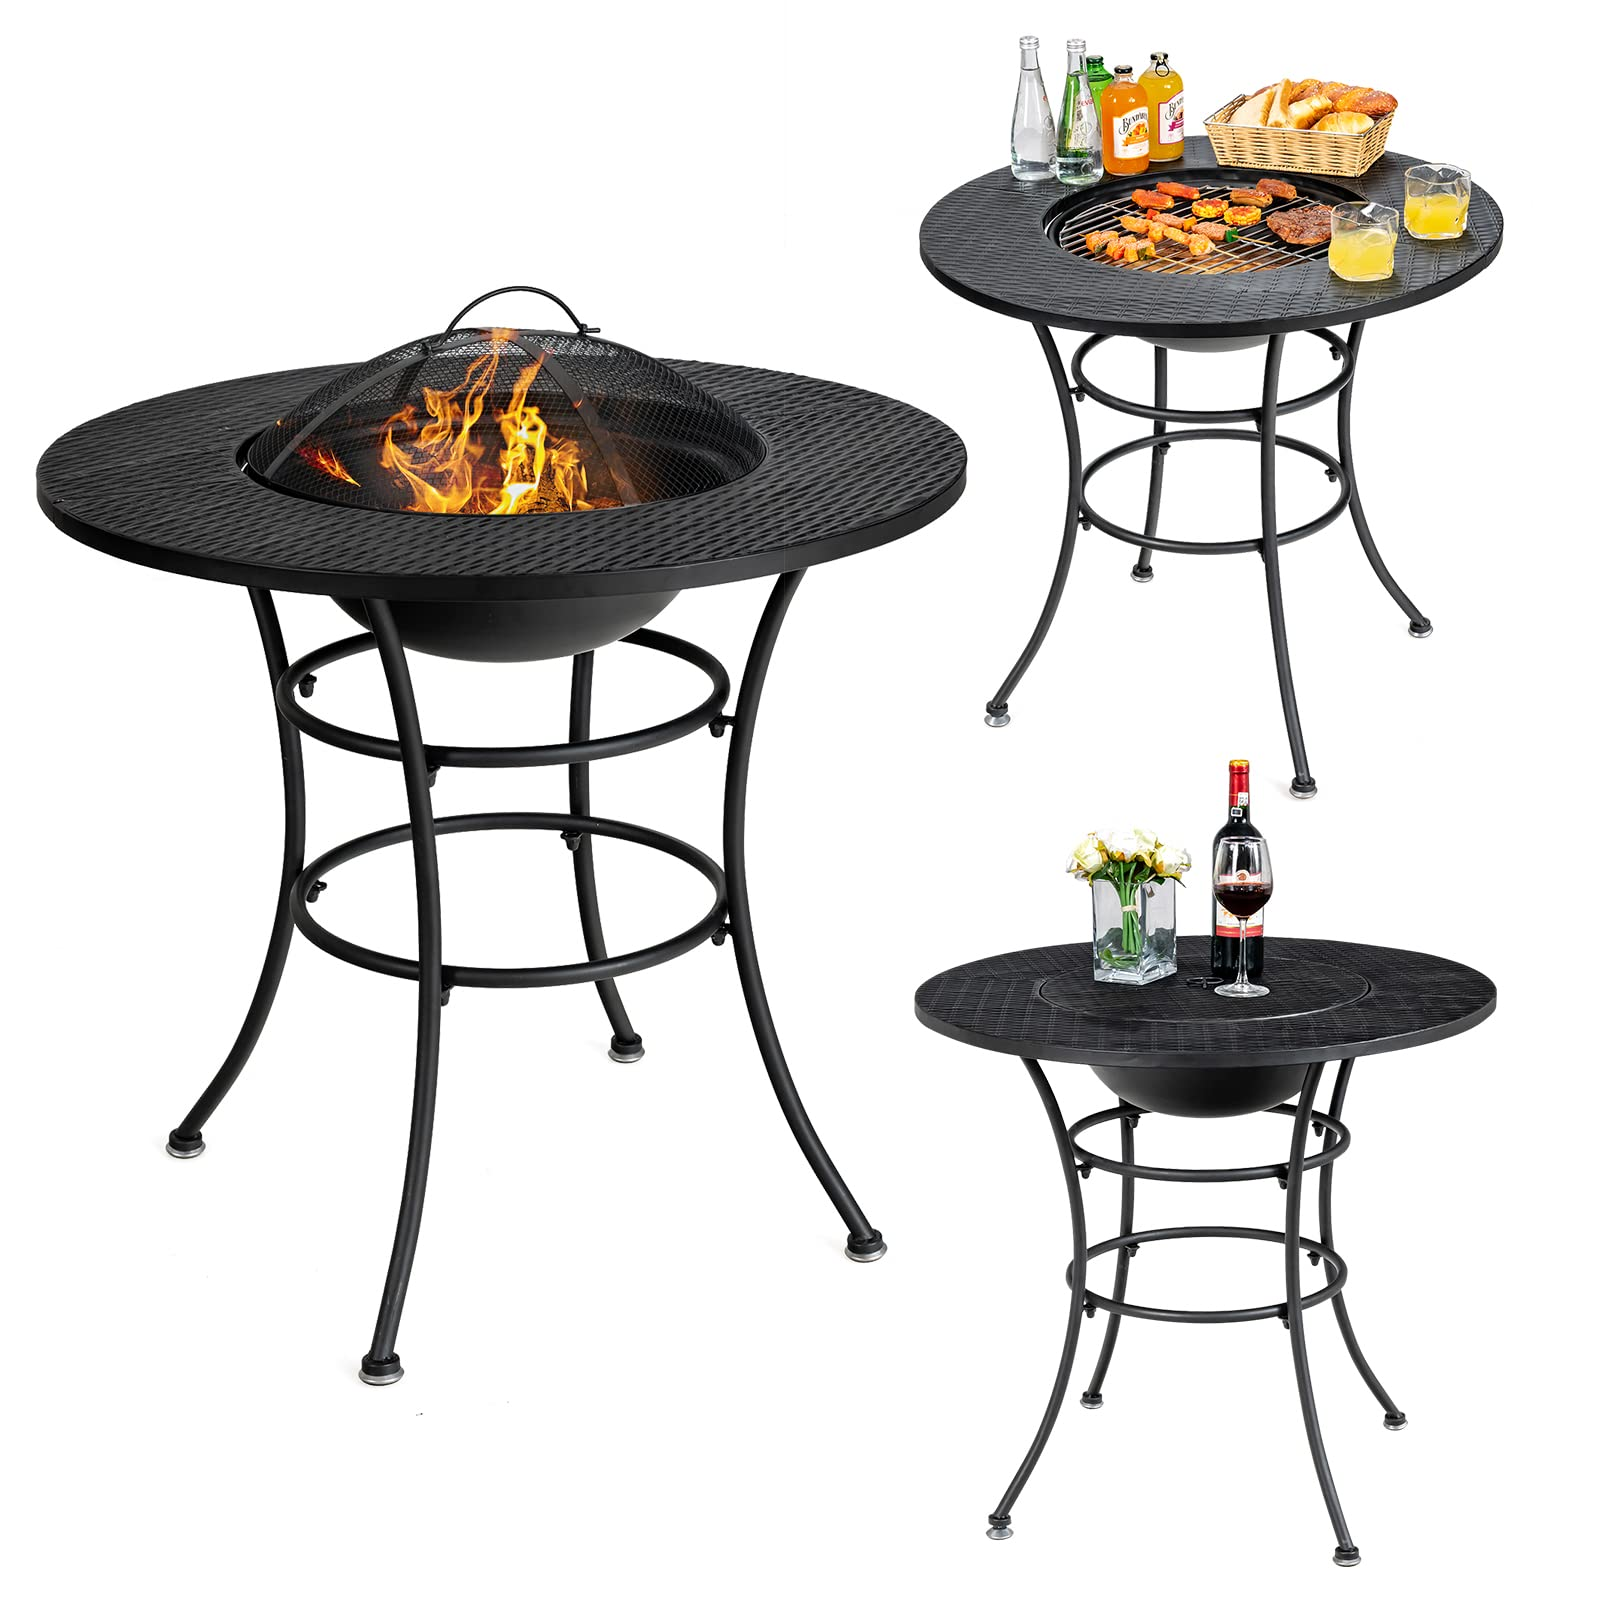 Giantex Fire Pit for Outside 32 Inch, 4-In-1 Multifunctional Dining Table for Camping,Metal Round Small Outdoor Fire Pits